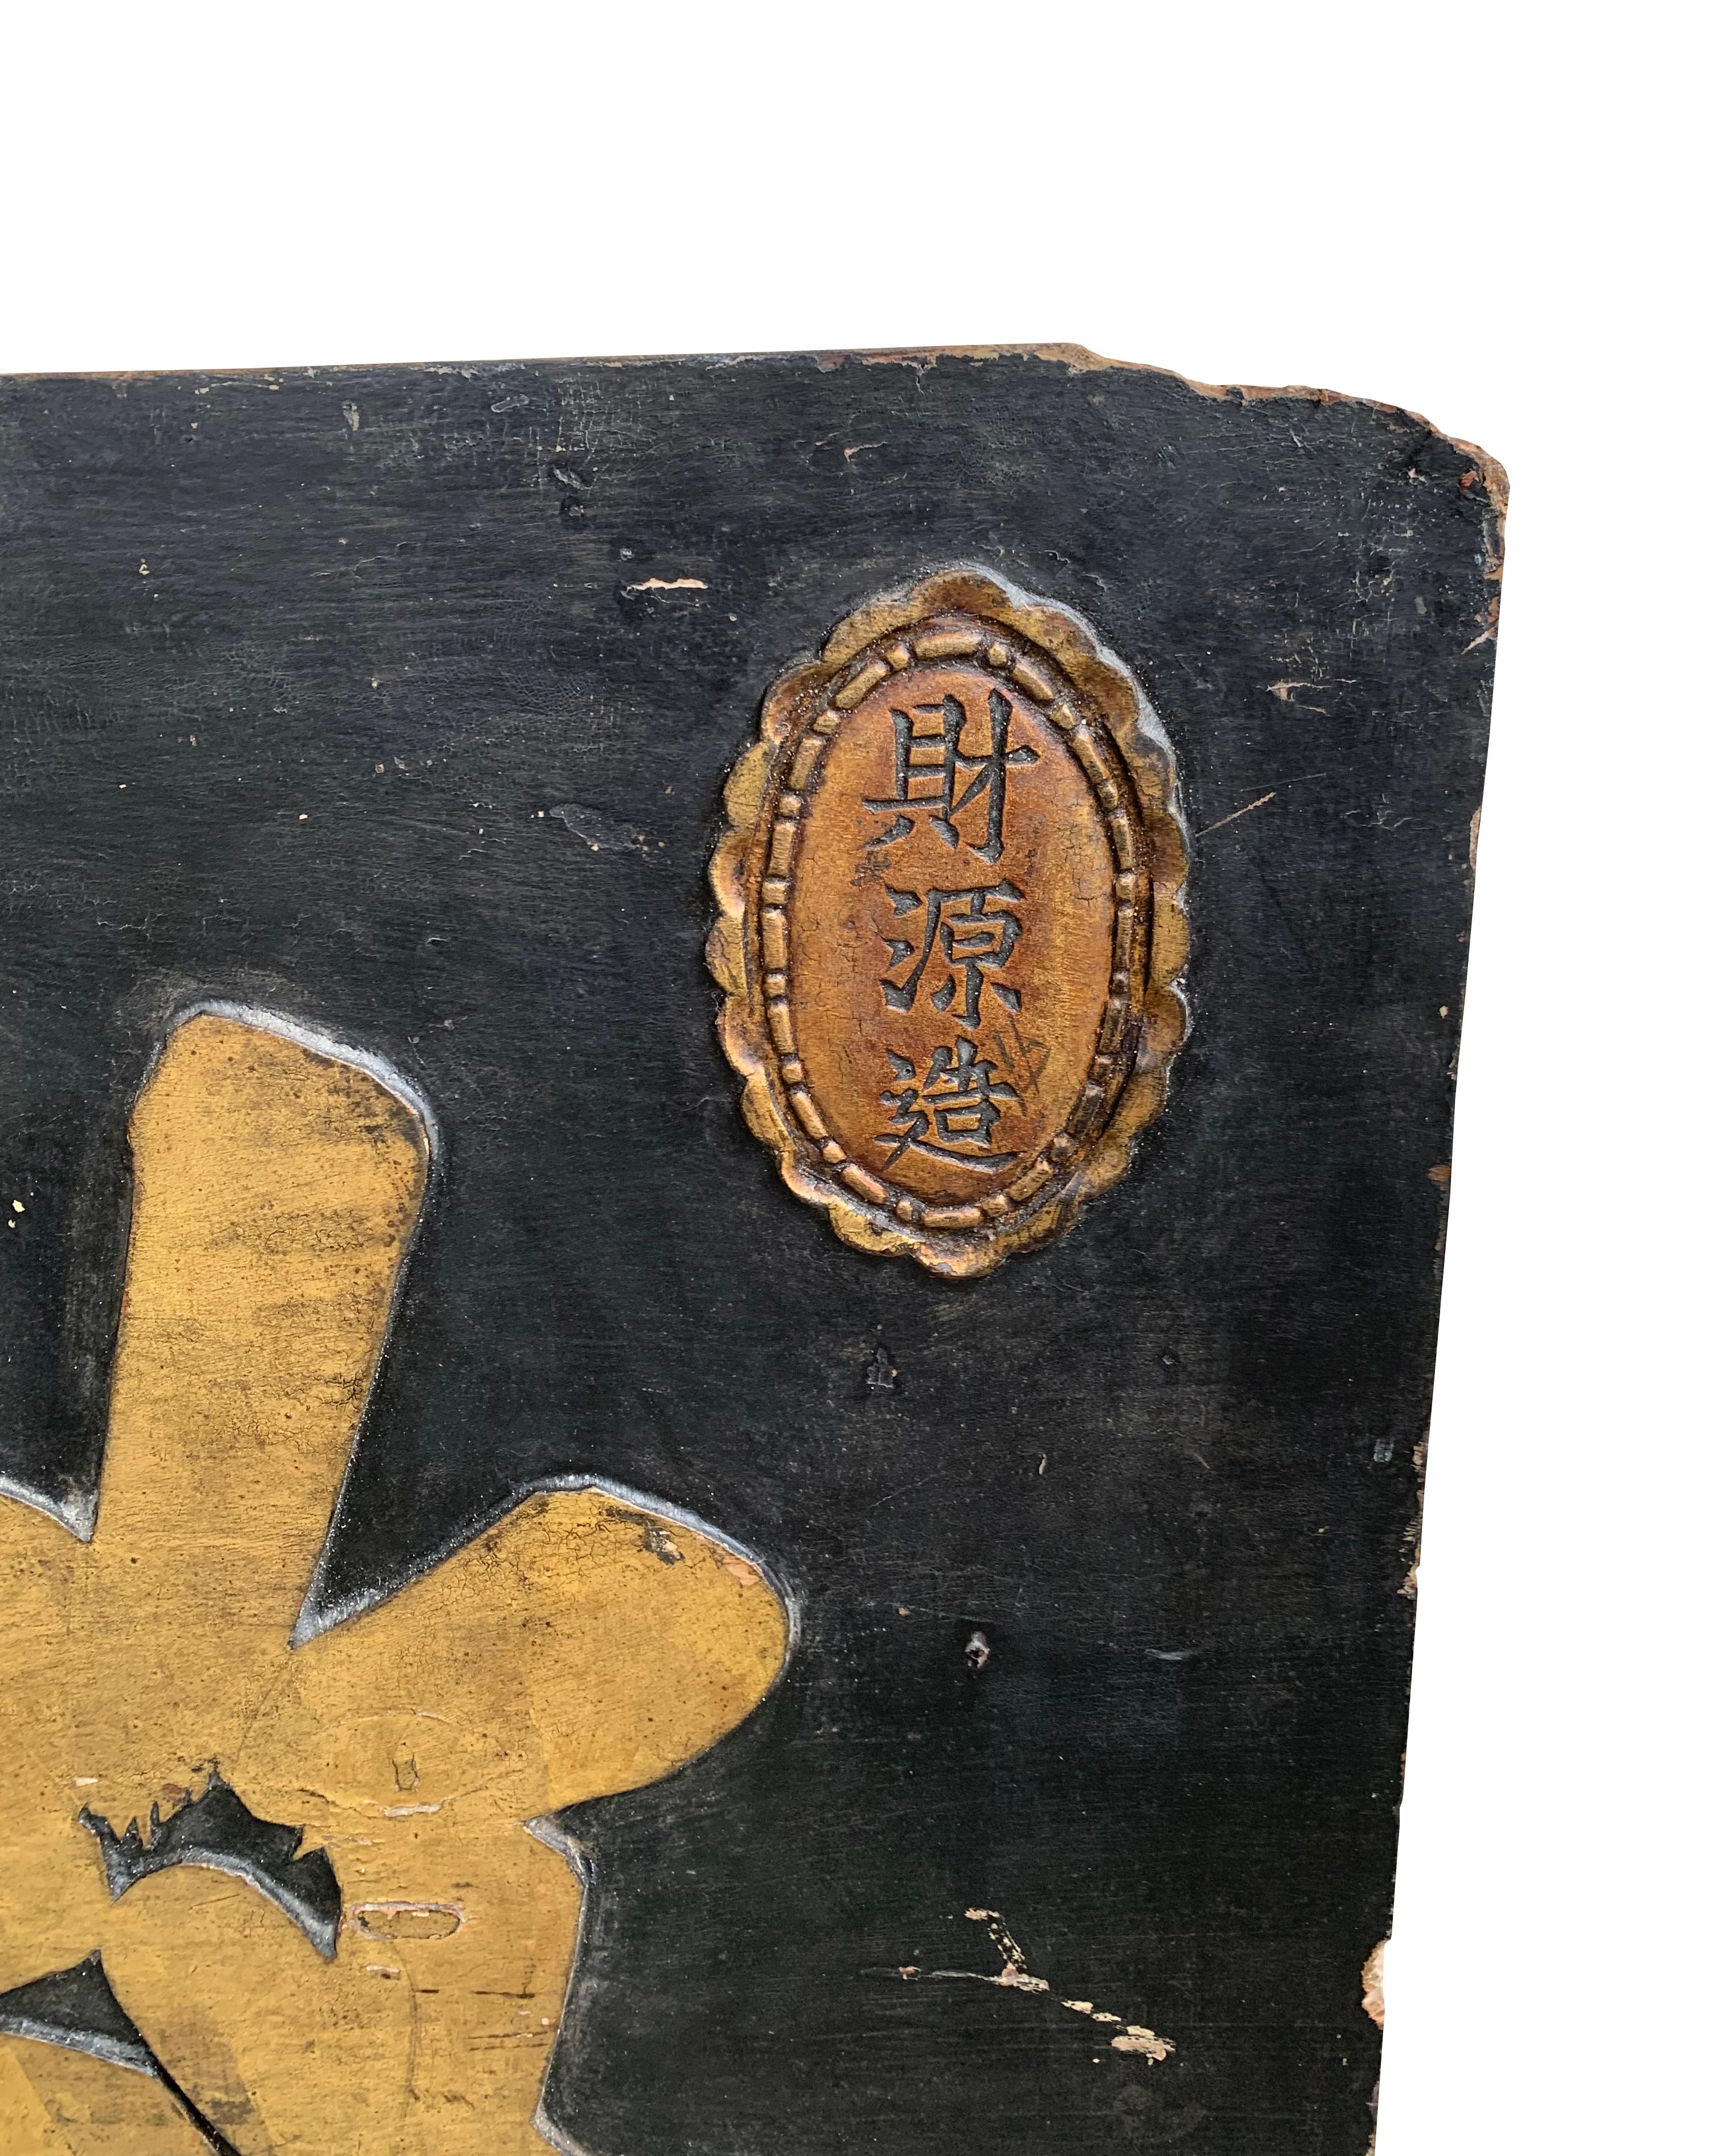 With a wood coloured base this signboard (crafted entirely from wood) highlights 3 large gold coloured Chinese Characters. The signboard dates to the early 20th Century and has aged beautifully with ageing of the wood as well as fading of the